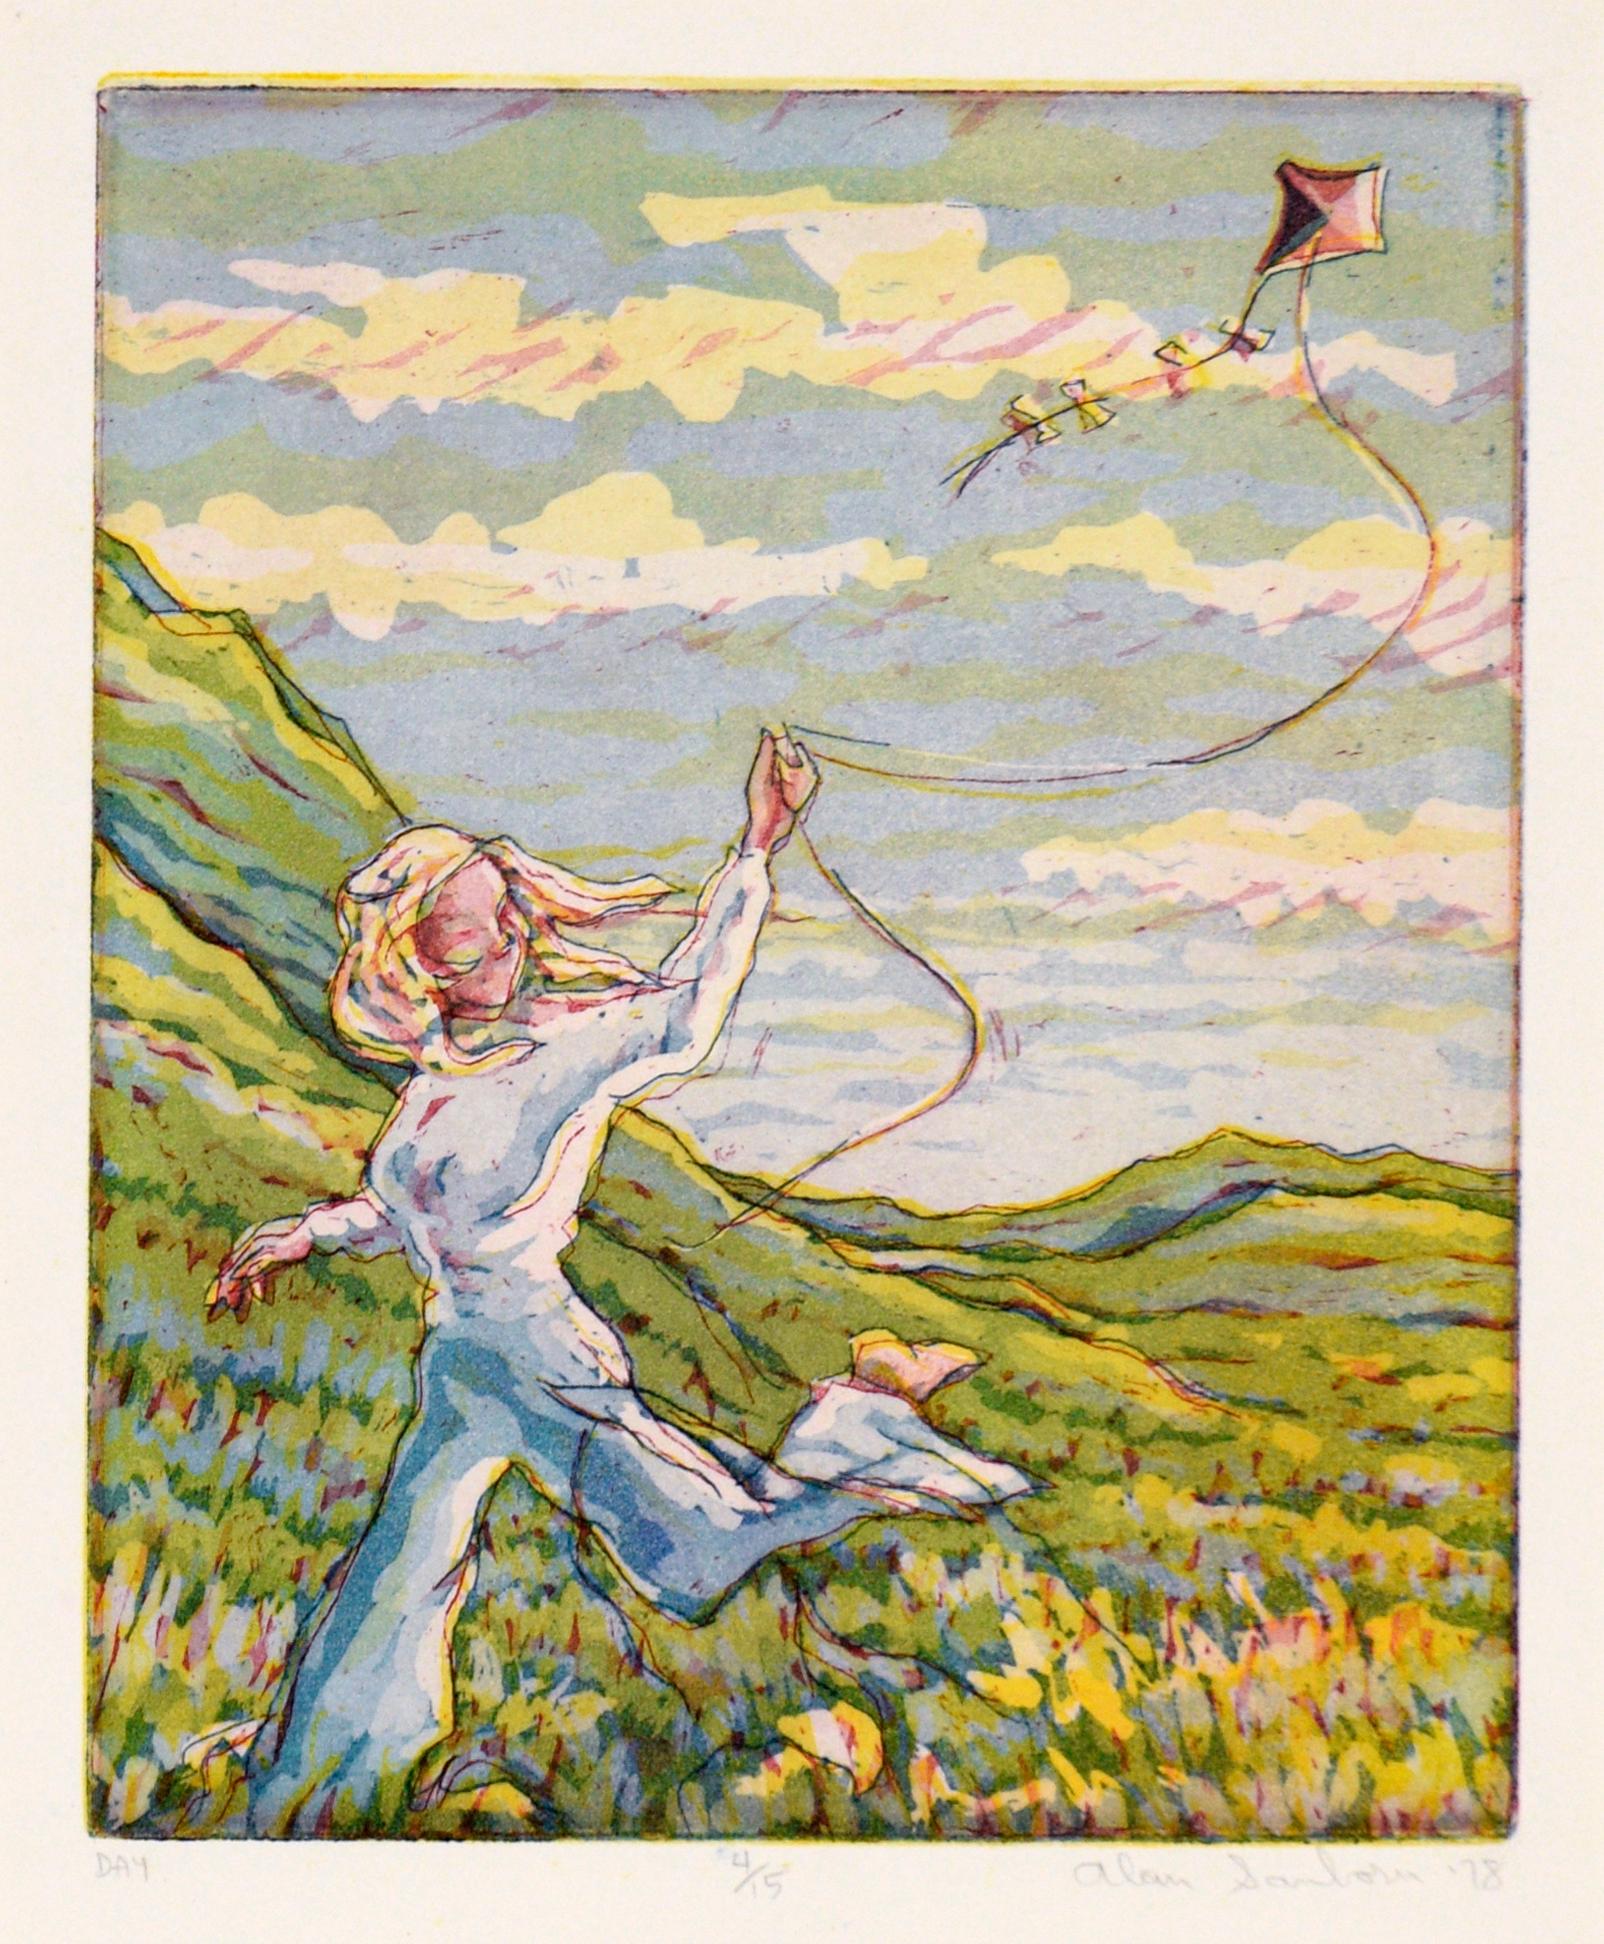 Running Through the Field with a Kite - Multi Layer Etching on Paper - Print by Alan Sanborn